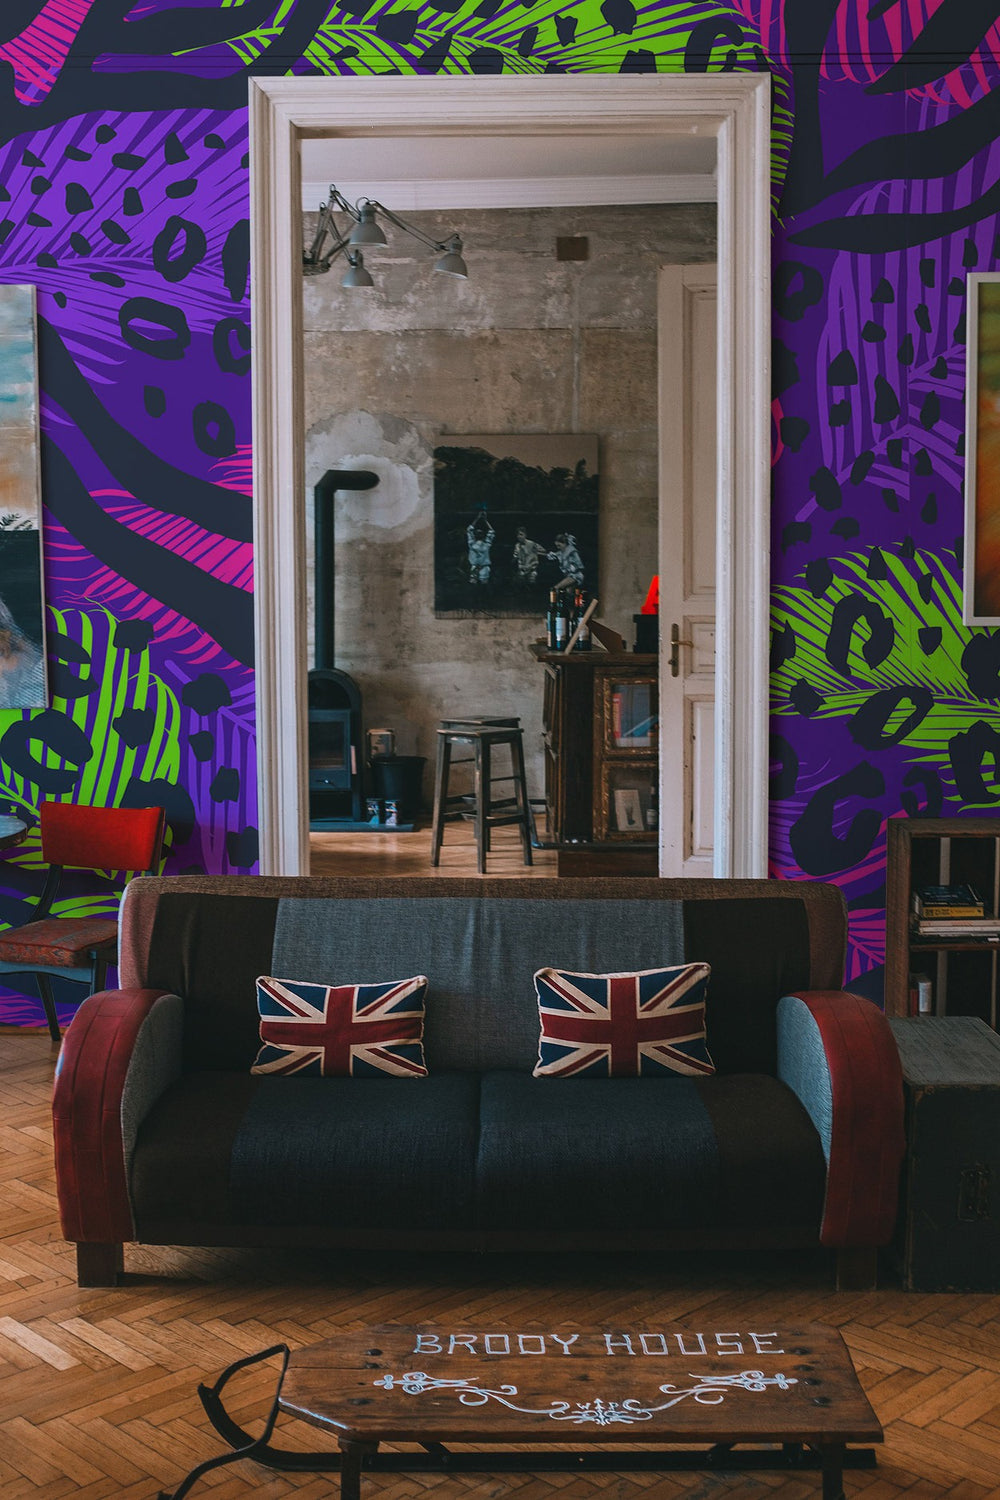 A vibrant and eclectic living room featuring a bold graphic wall mural, a dark sofa with Union Jack pillows, and a wooden coffee table with 'Brody House' text.